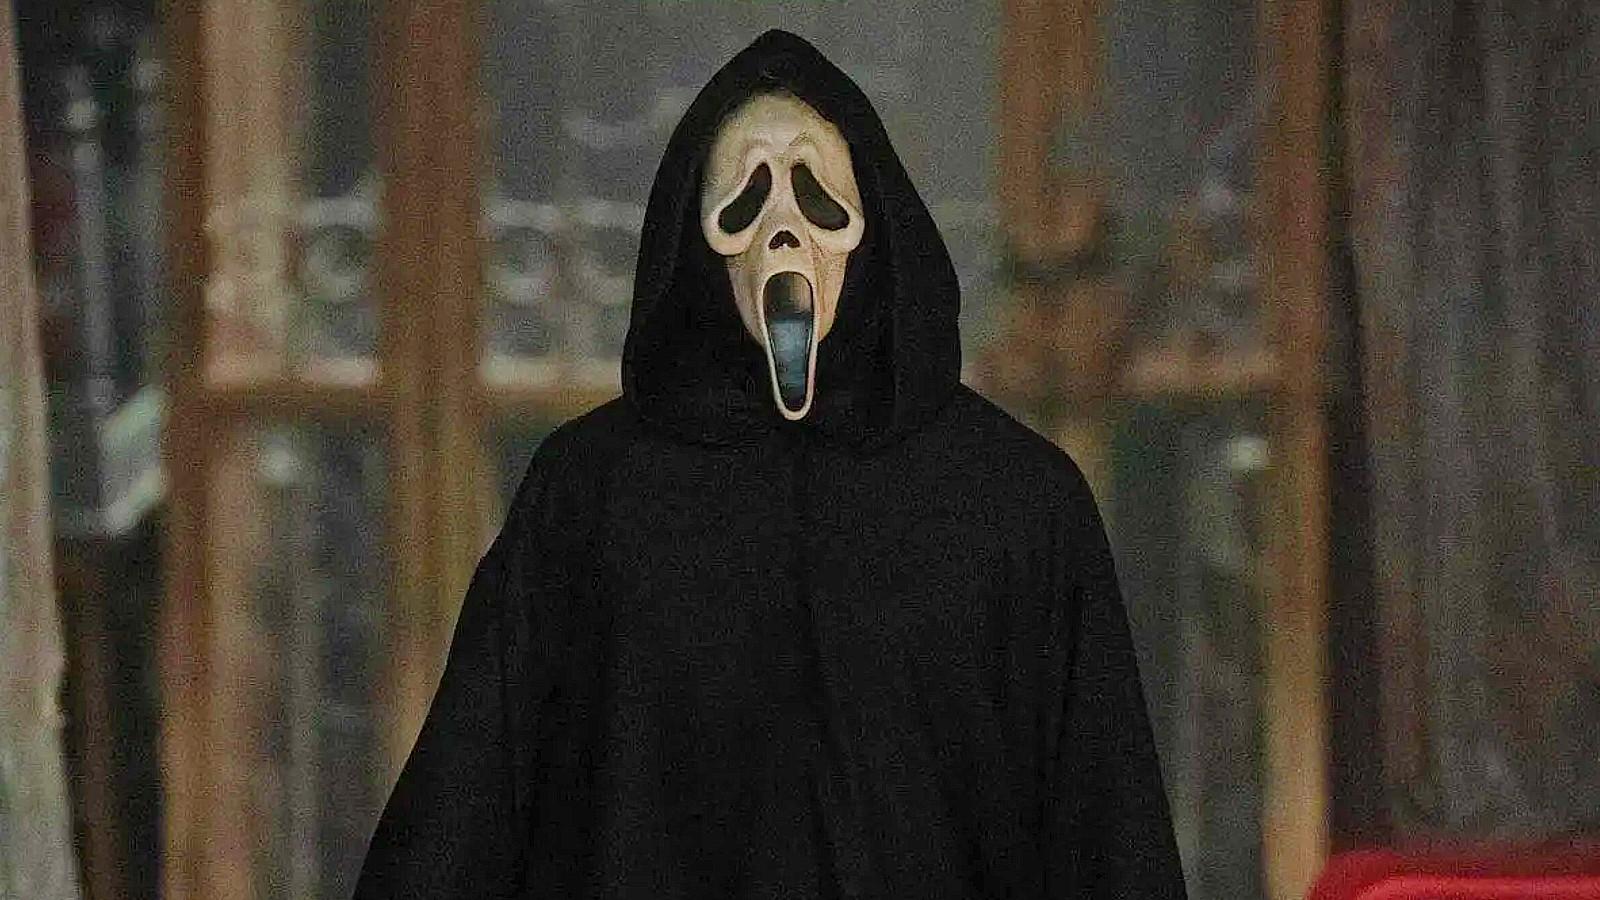 Everything we know about Scream 6 so far